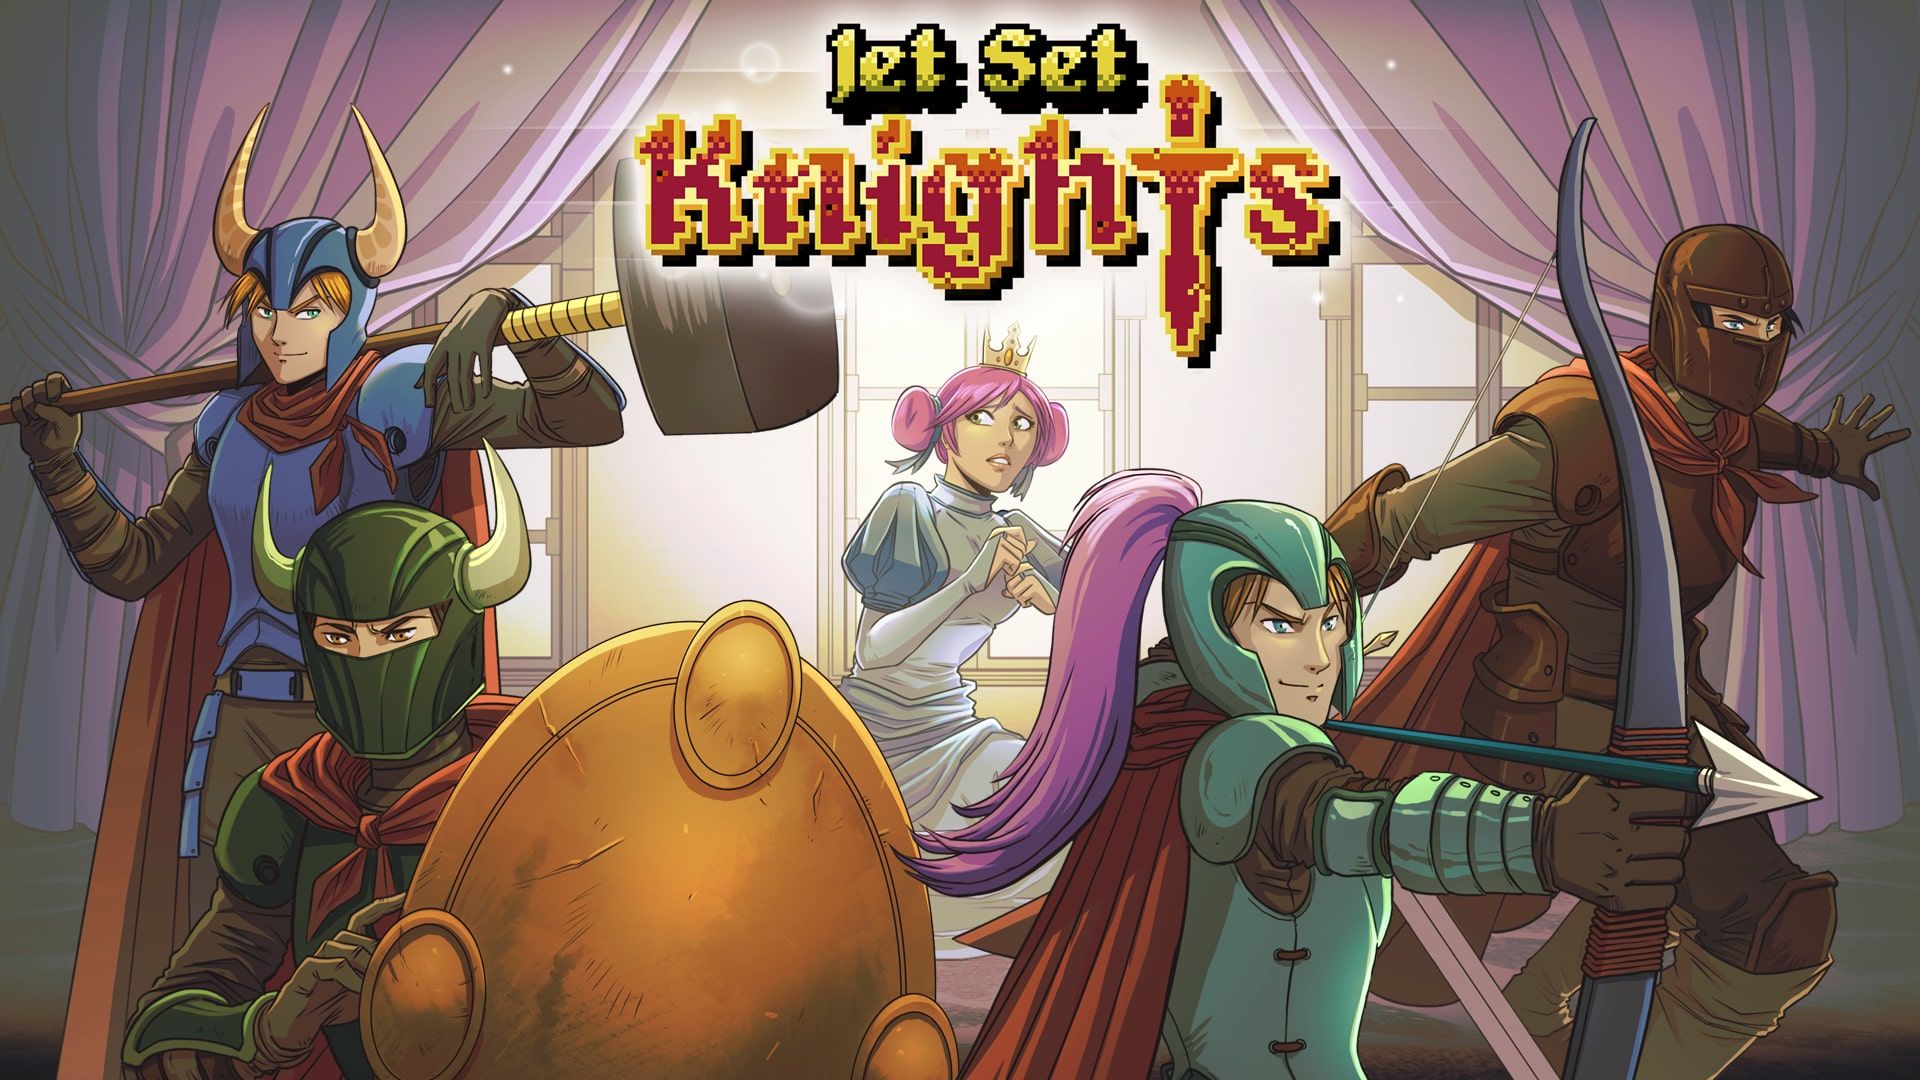 Jet Set Knights cover image